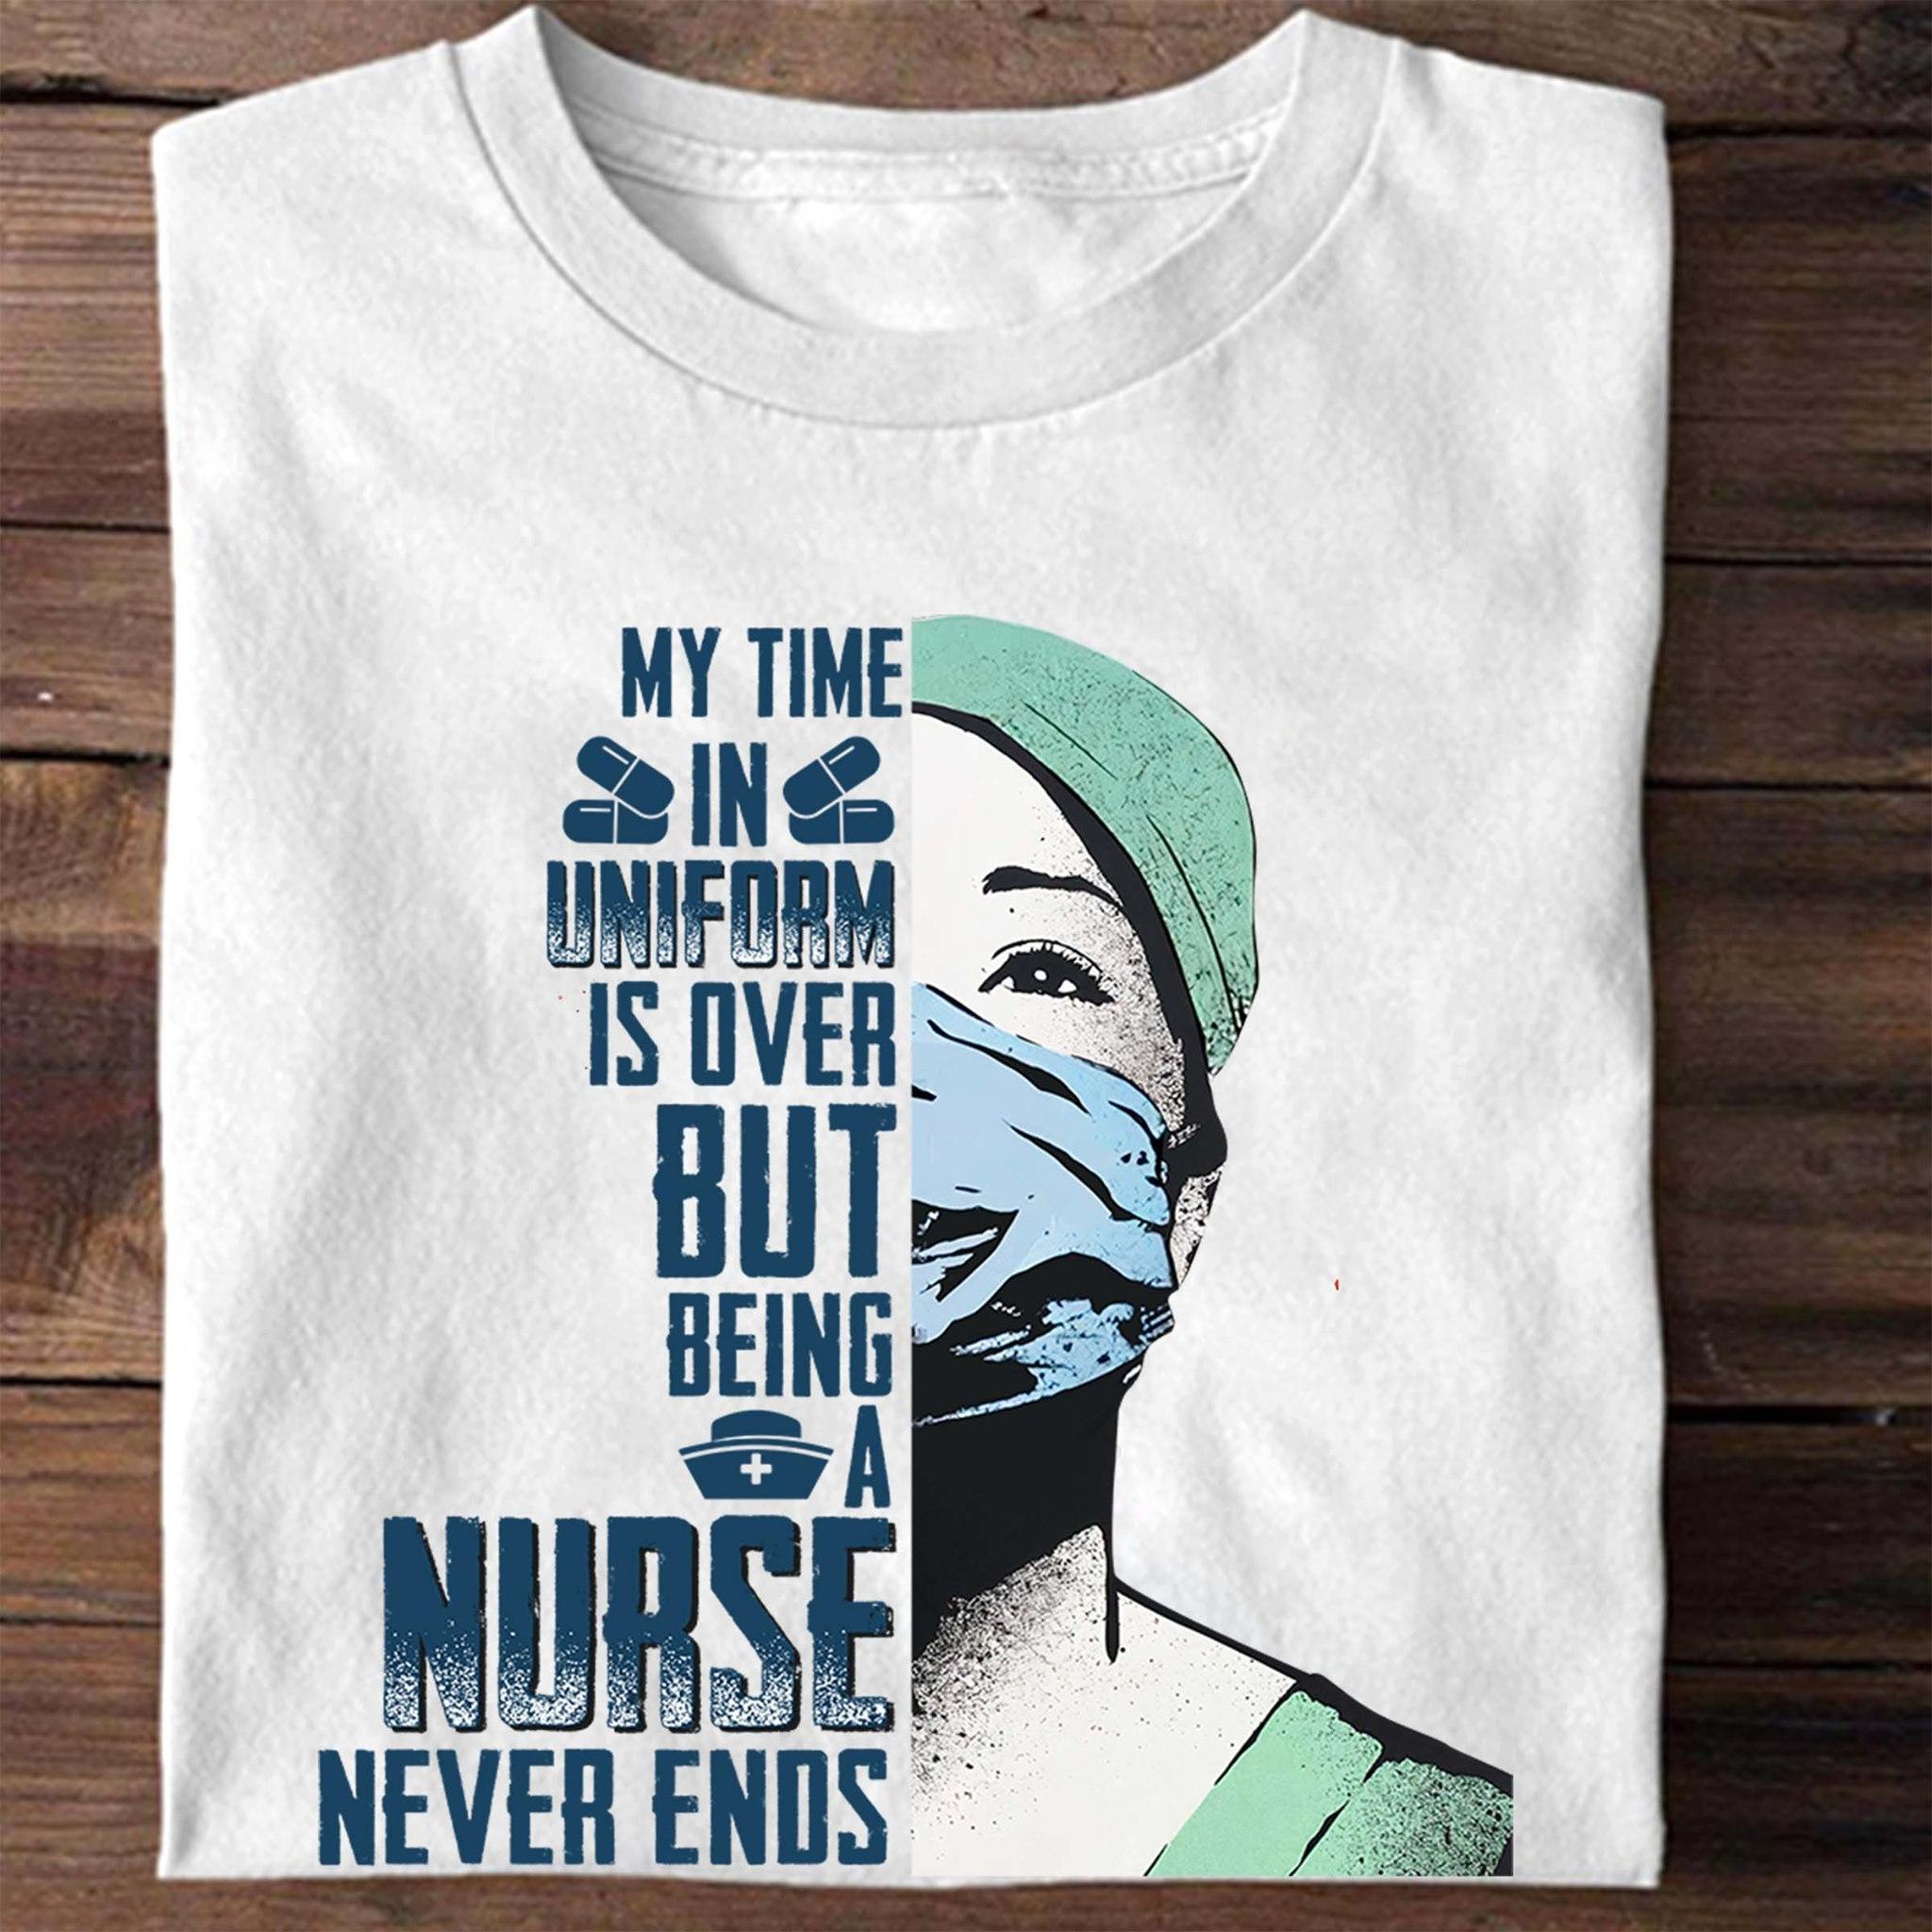 My time in uniform is over but being a nurse never ends - Nursing the job, nurse the hero